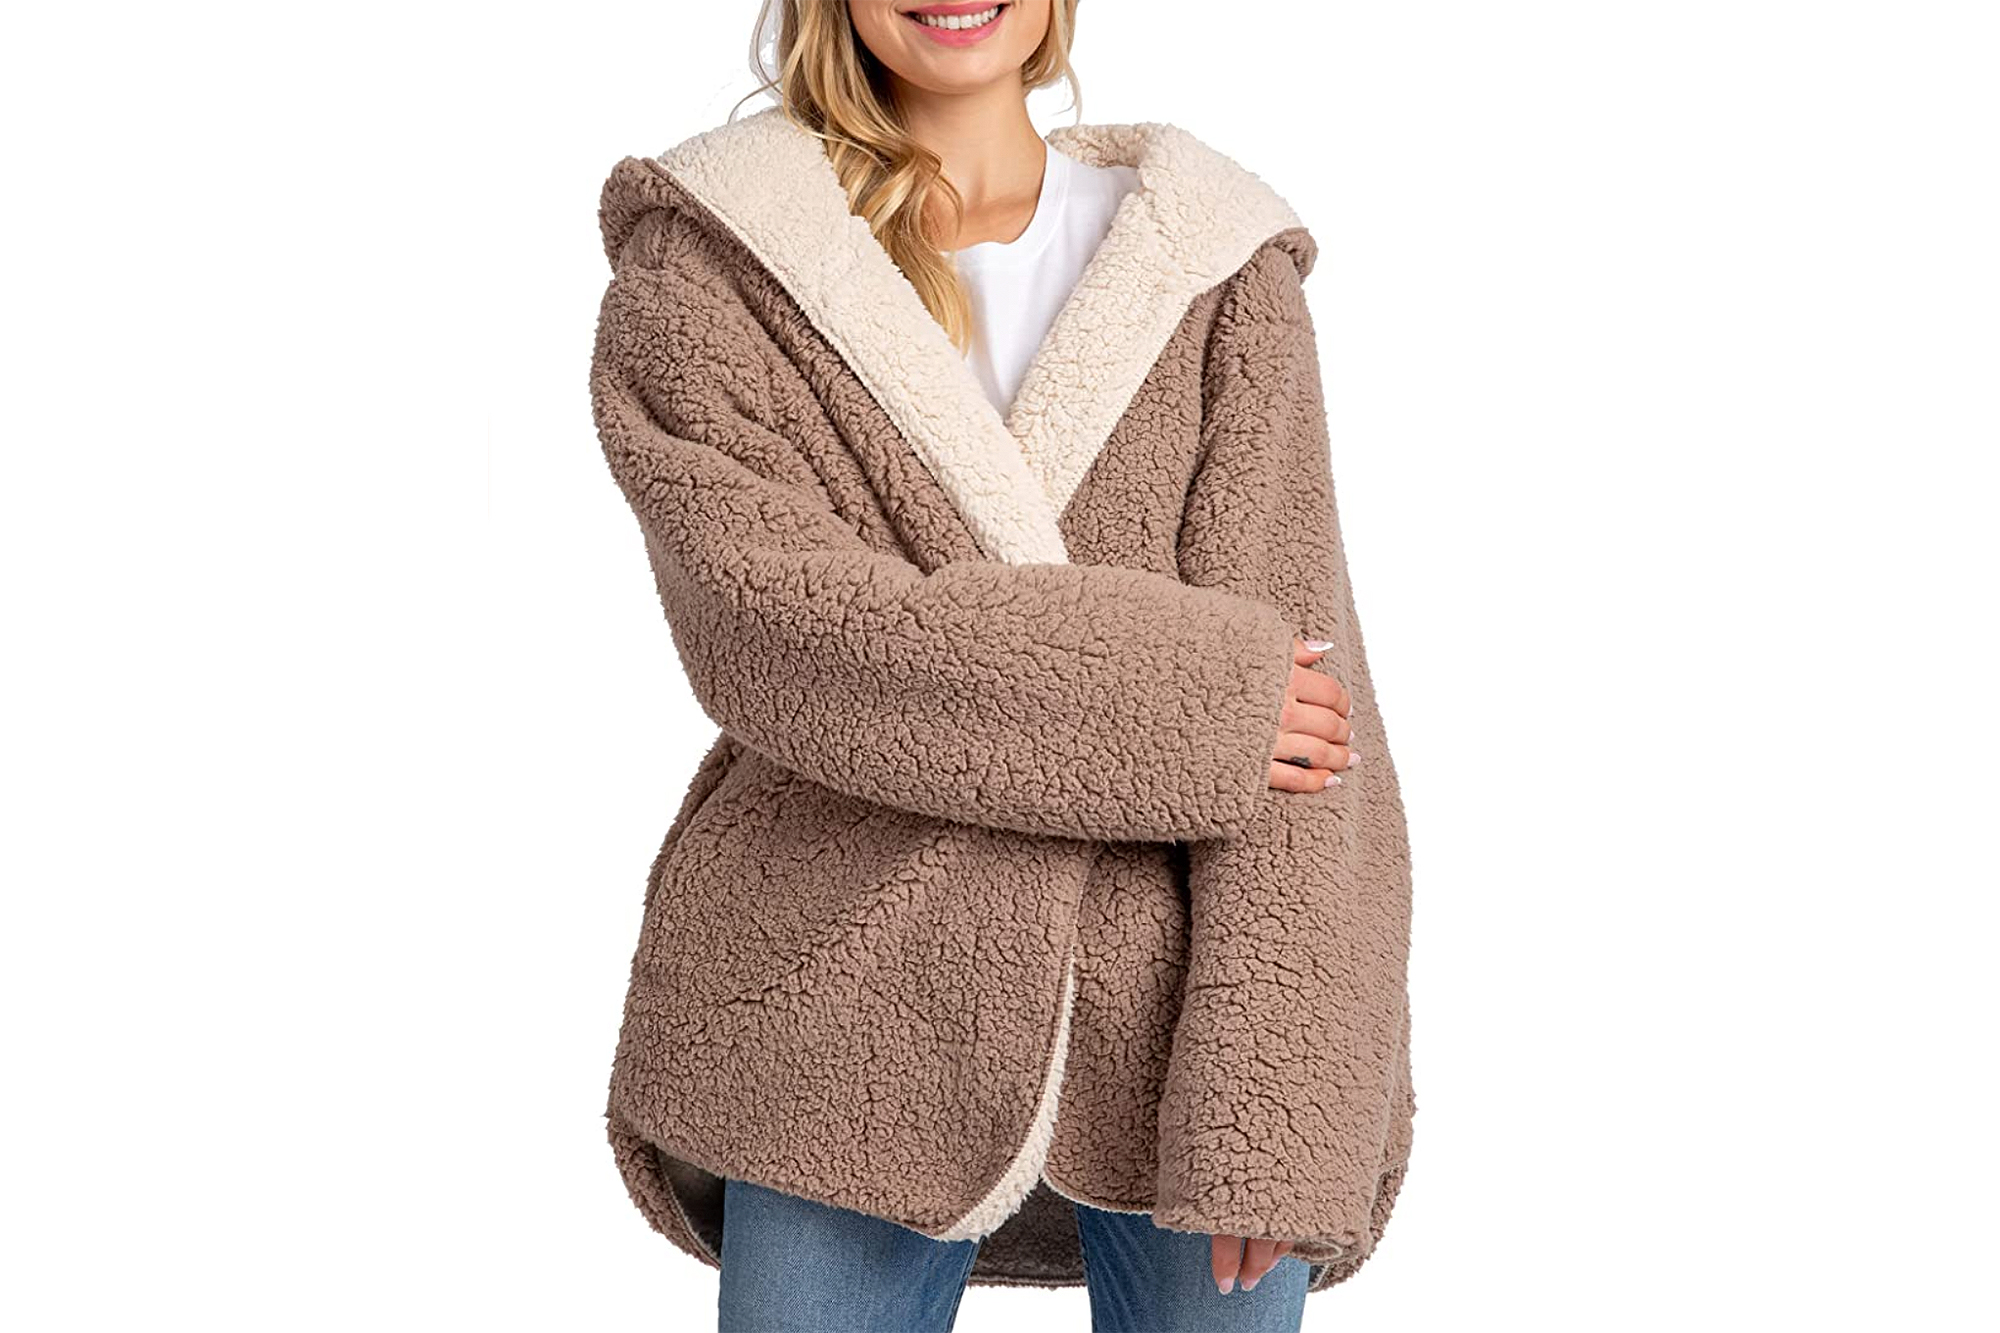 Love Tree Fuzzy Teddy Coat Is How We're Beating the Winter Cold